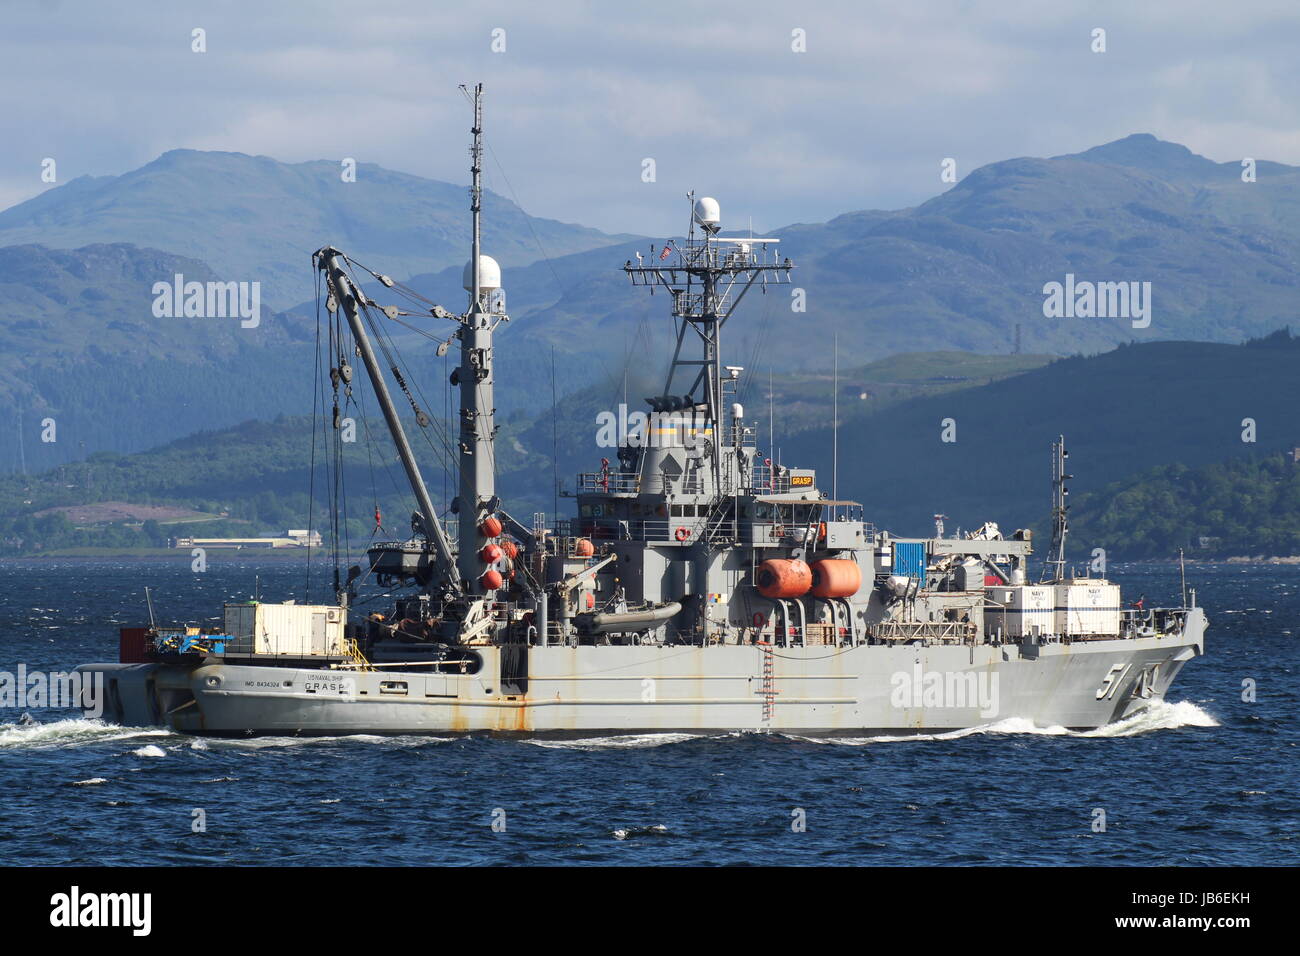 USNS Grasp (T-ARS-51), a Safeguard-class salvage vessel operated by the United States Navy, passing Gourock on its way to Faslane. Stock Photo